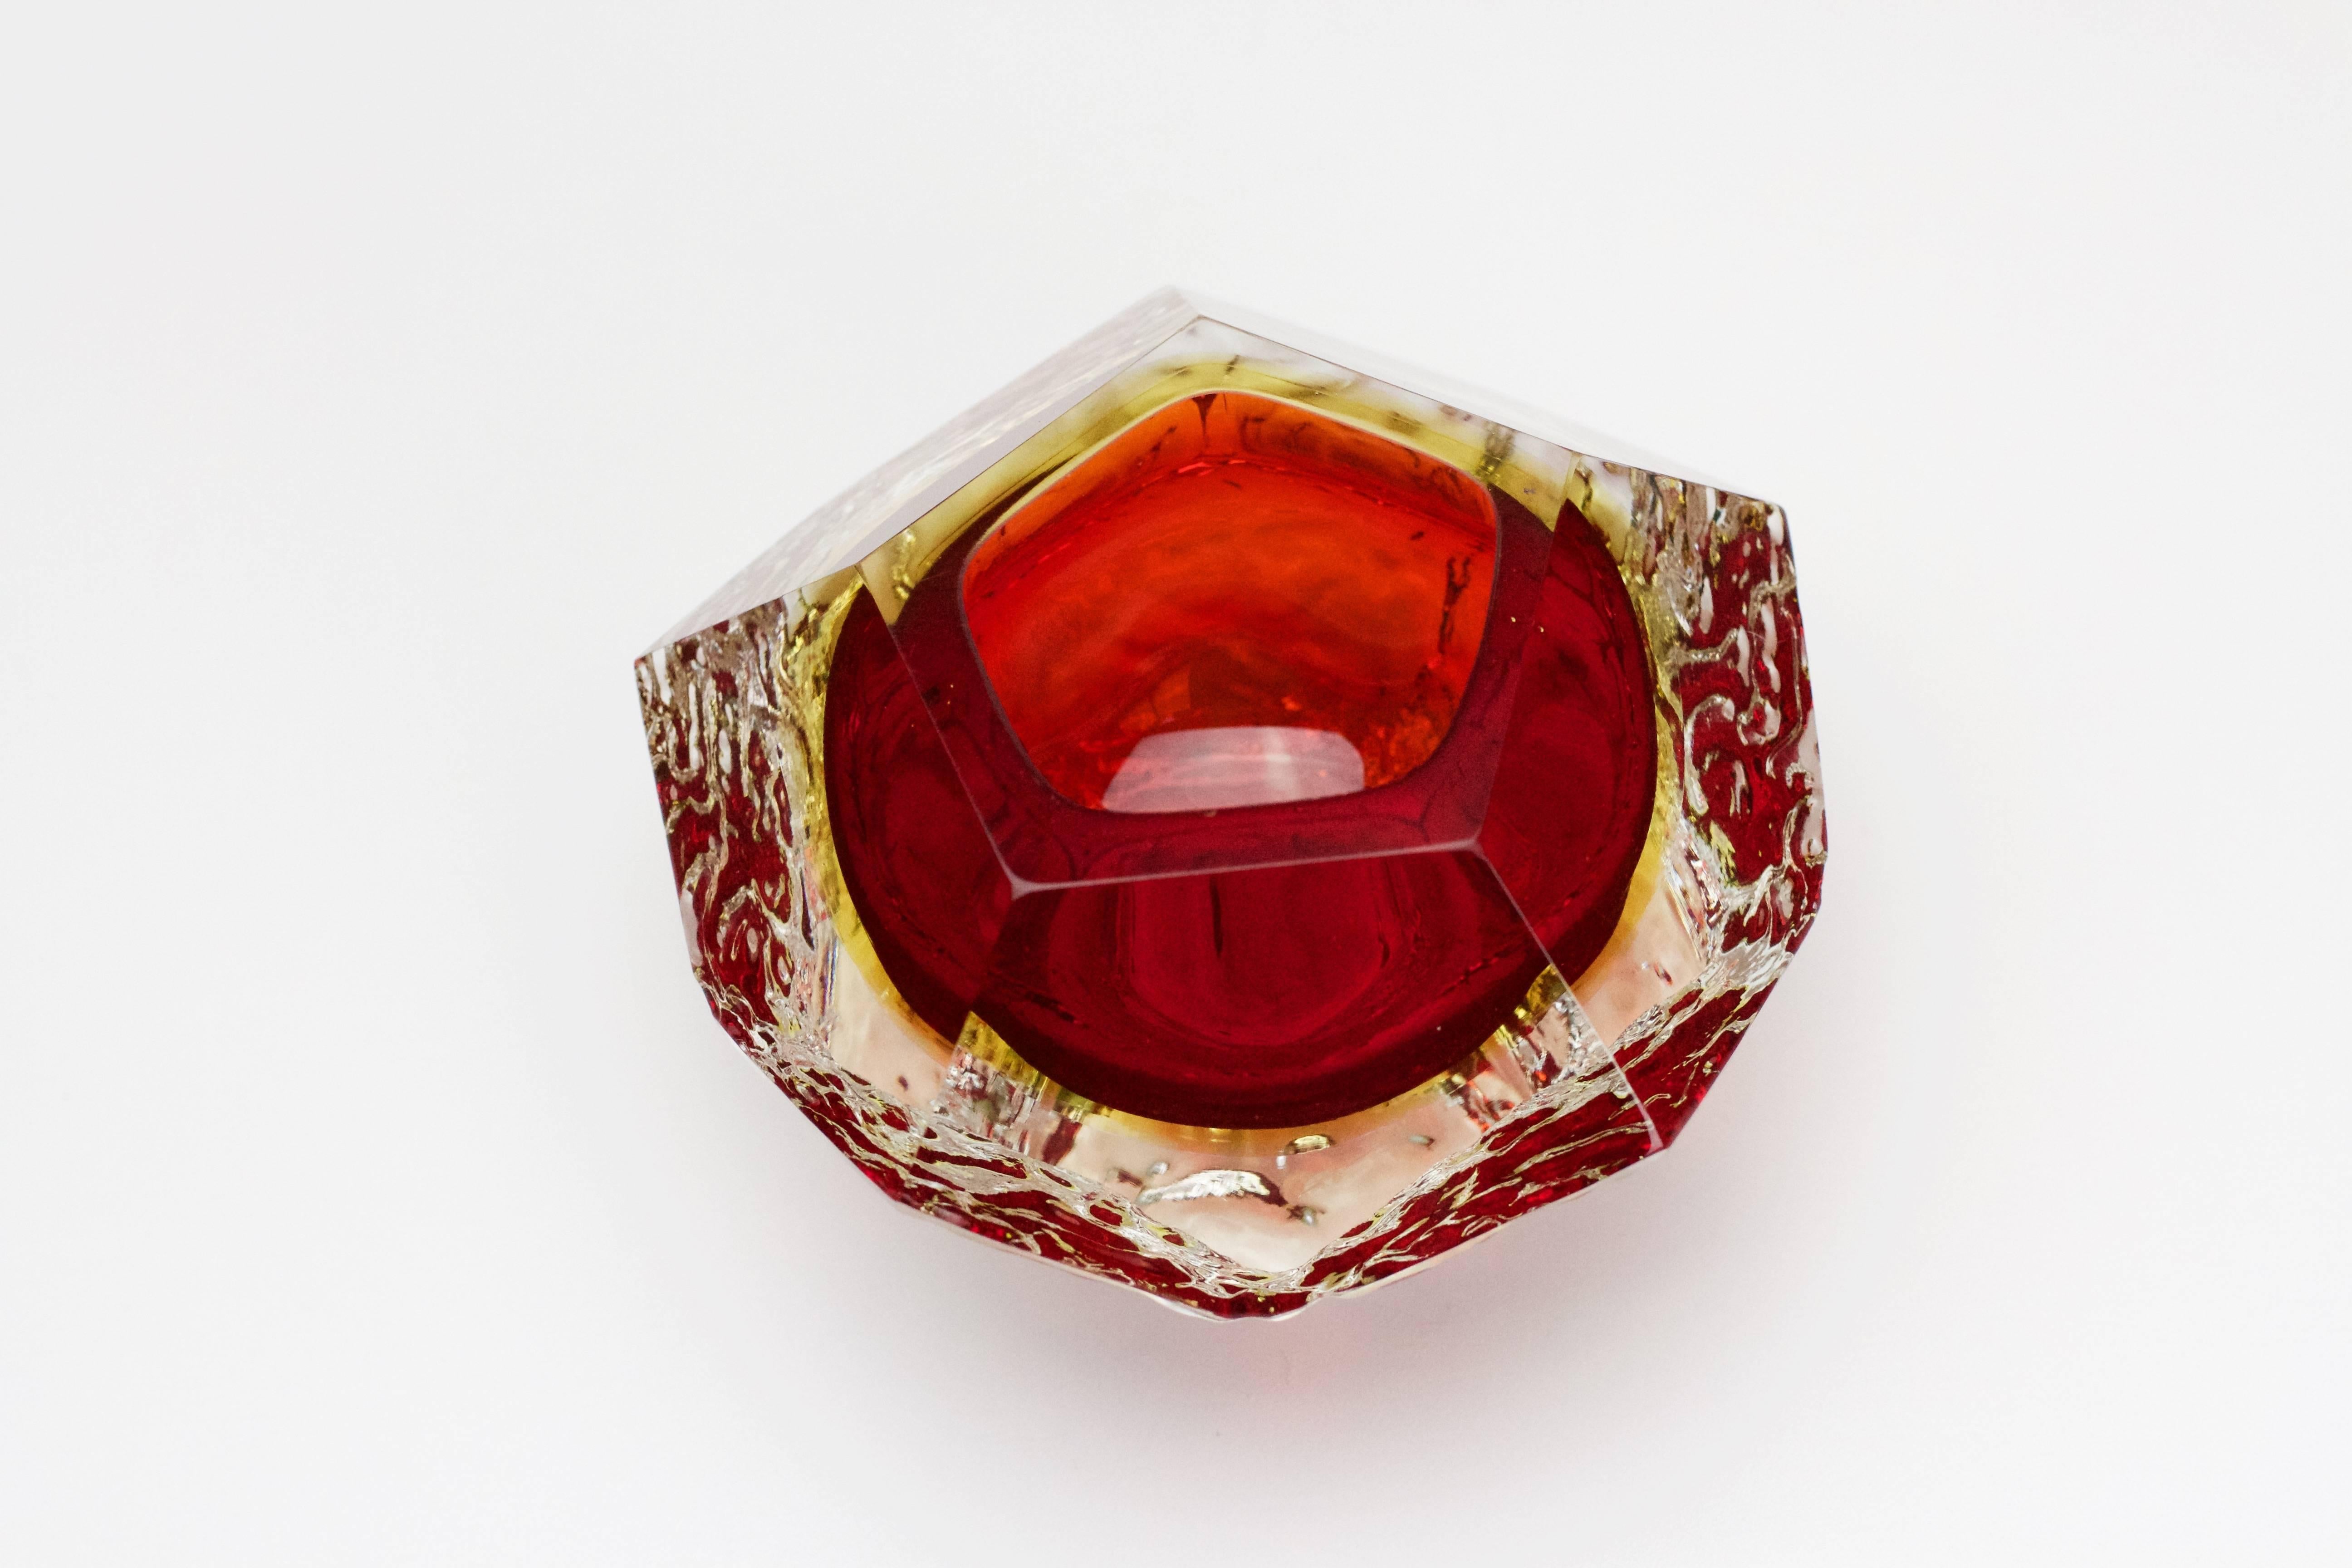 A beautiful little Murano art glass bowl by Mandruzzato, circa 1960. The combination of fire red and the textured clear 'Sommerso' ice glass looks simply stunning.